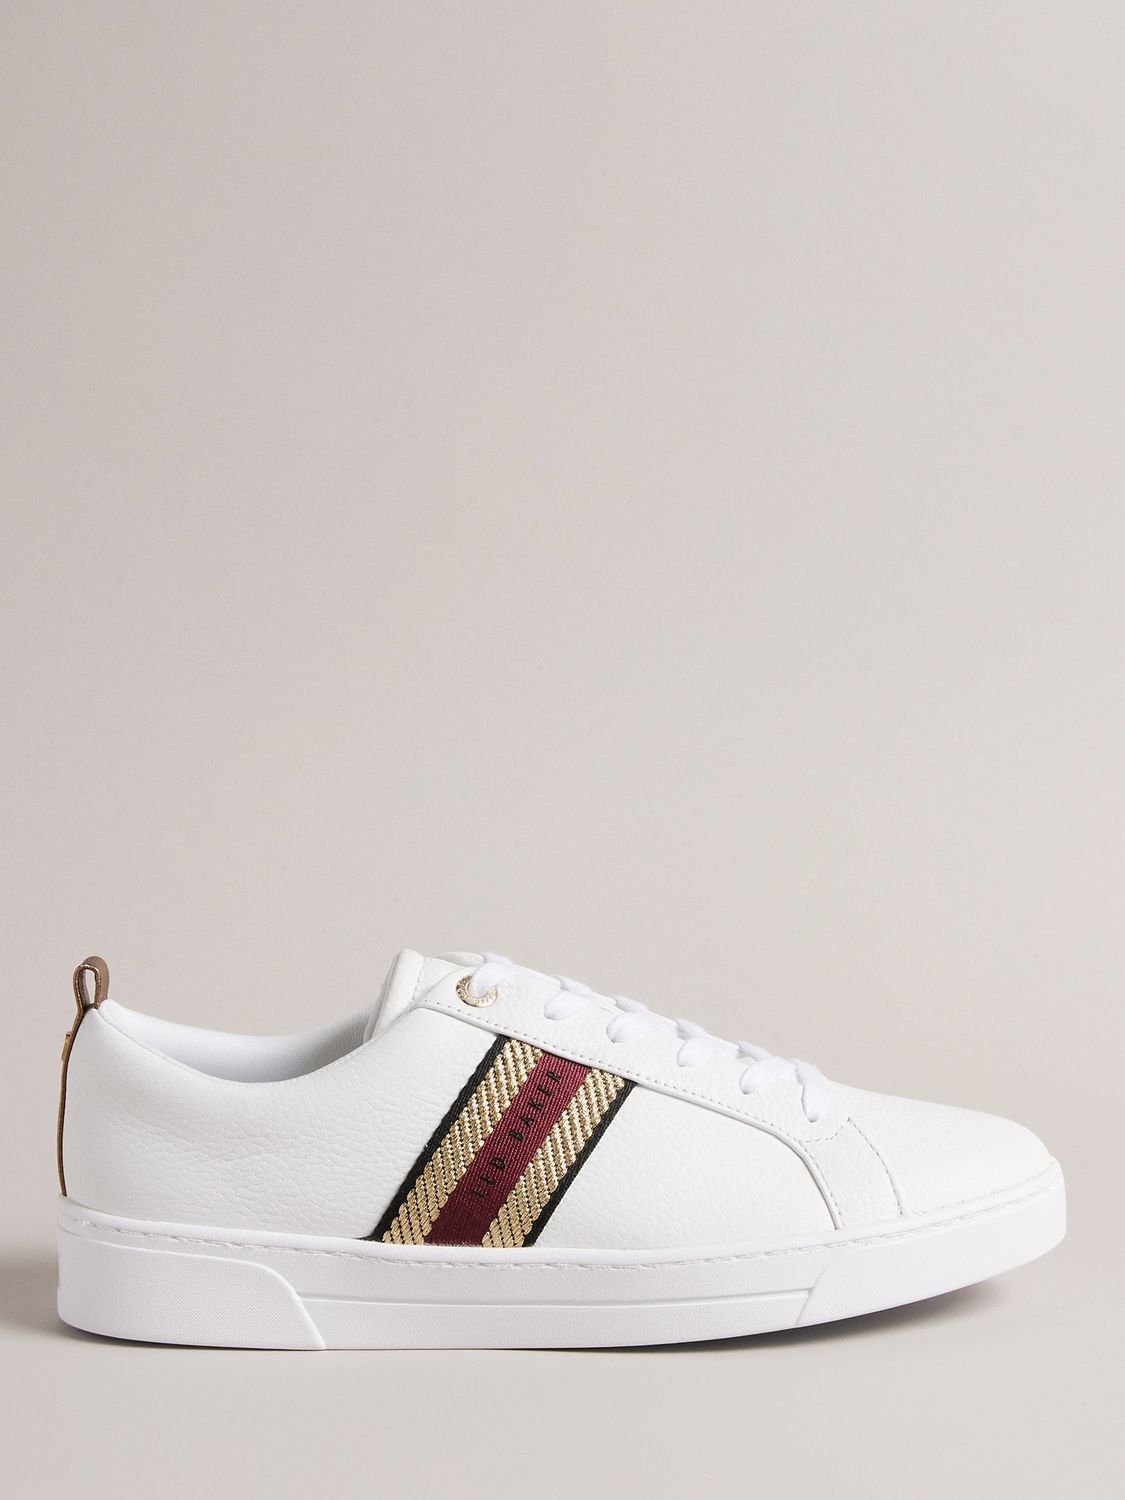 Ted Baker Baily Leather Trainers, White/Red at John Lewis & Partners